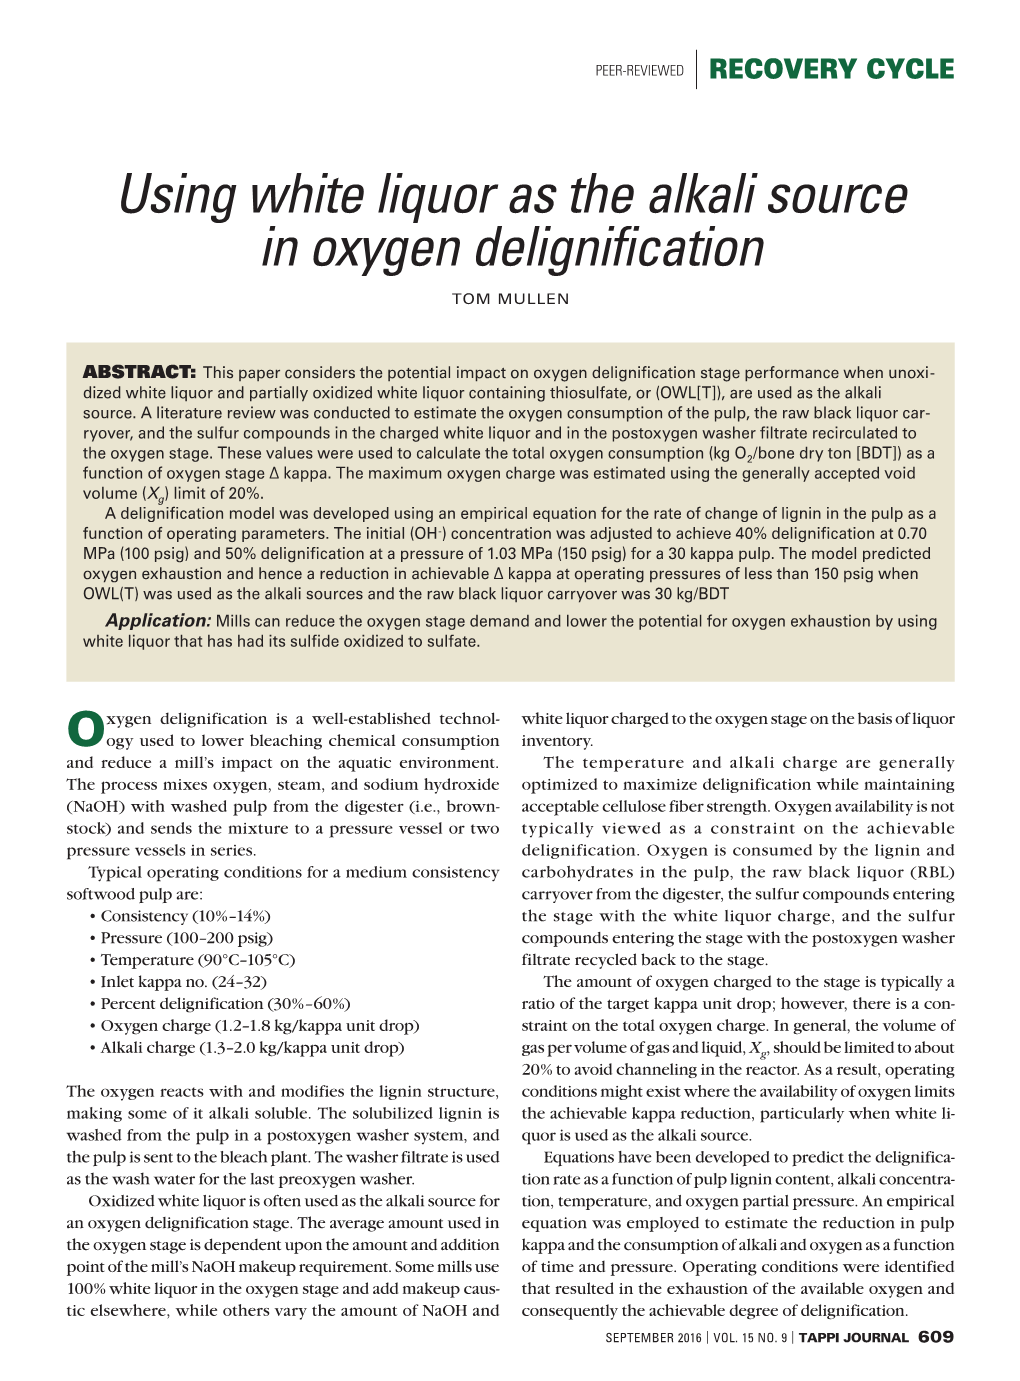 Using White Liquor As the Alkali Source in Oxygen Delignification, TAPPI